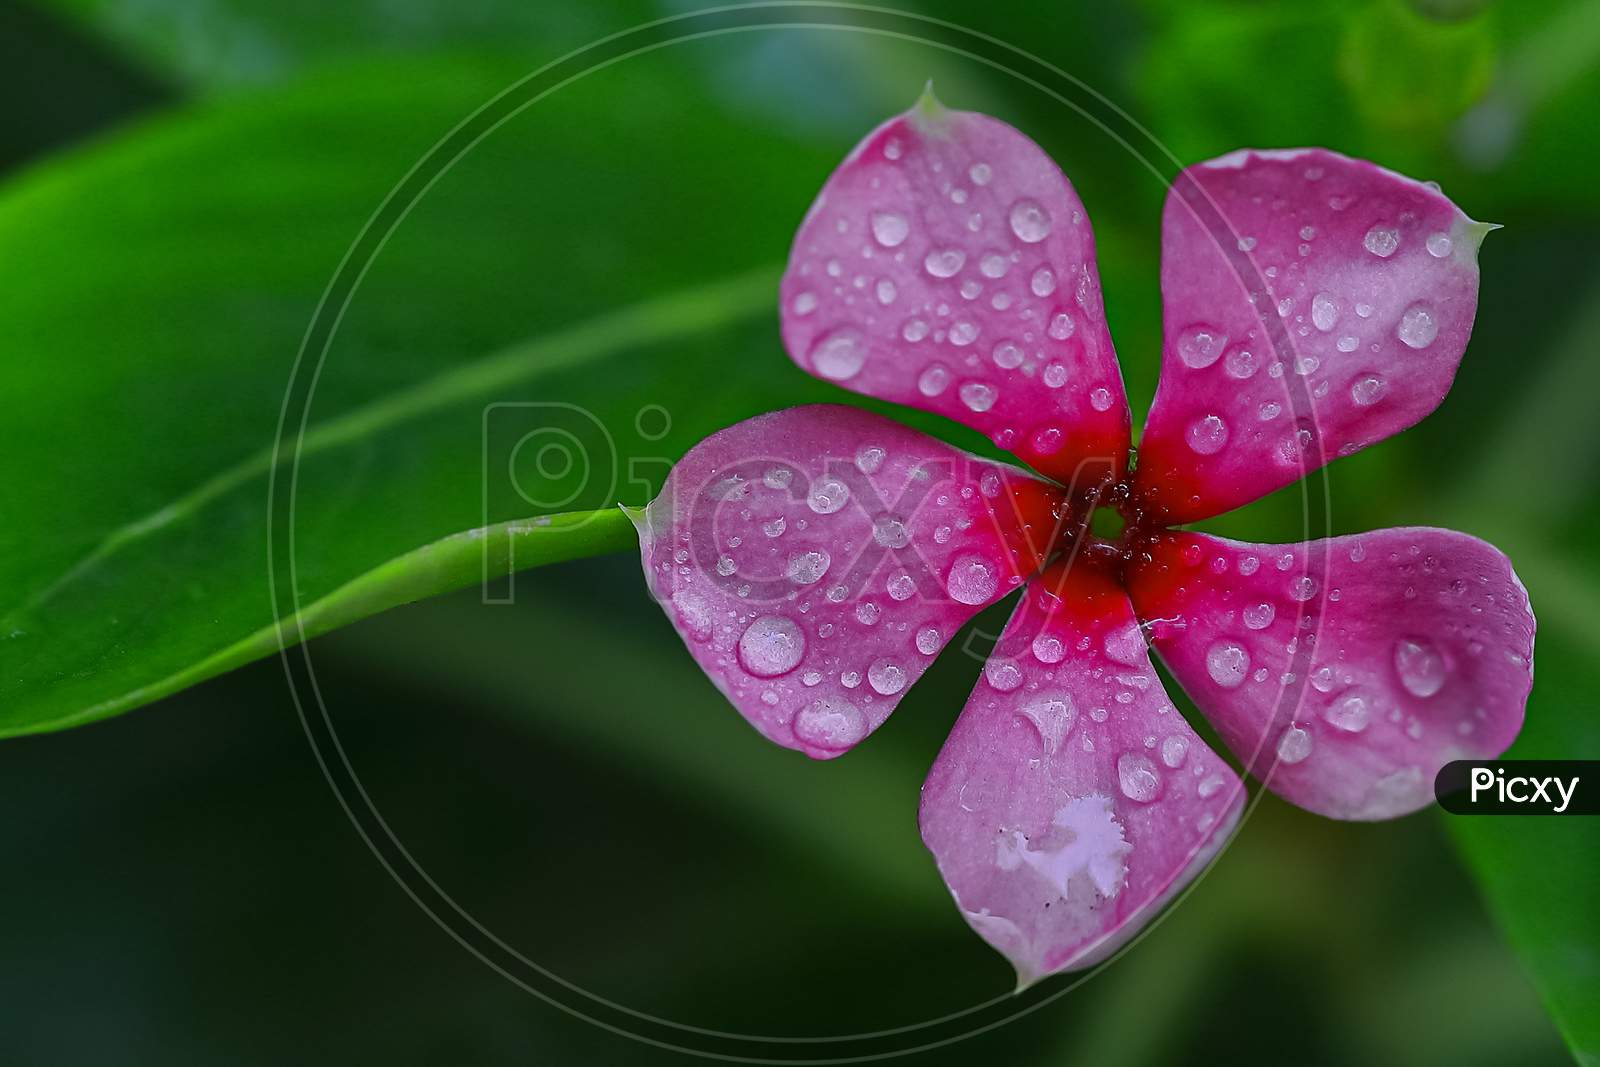 A pink periwinkle flower with water droplets on it